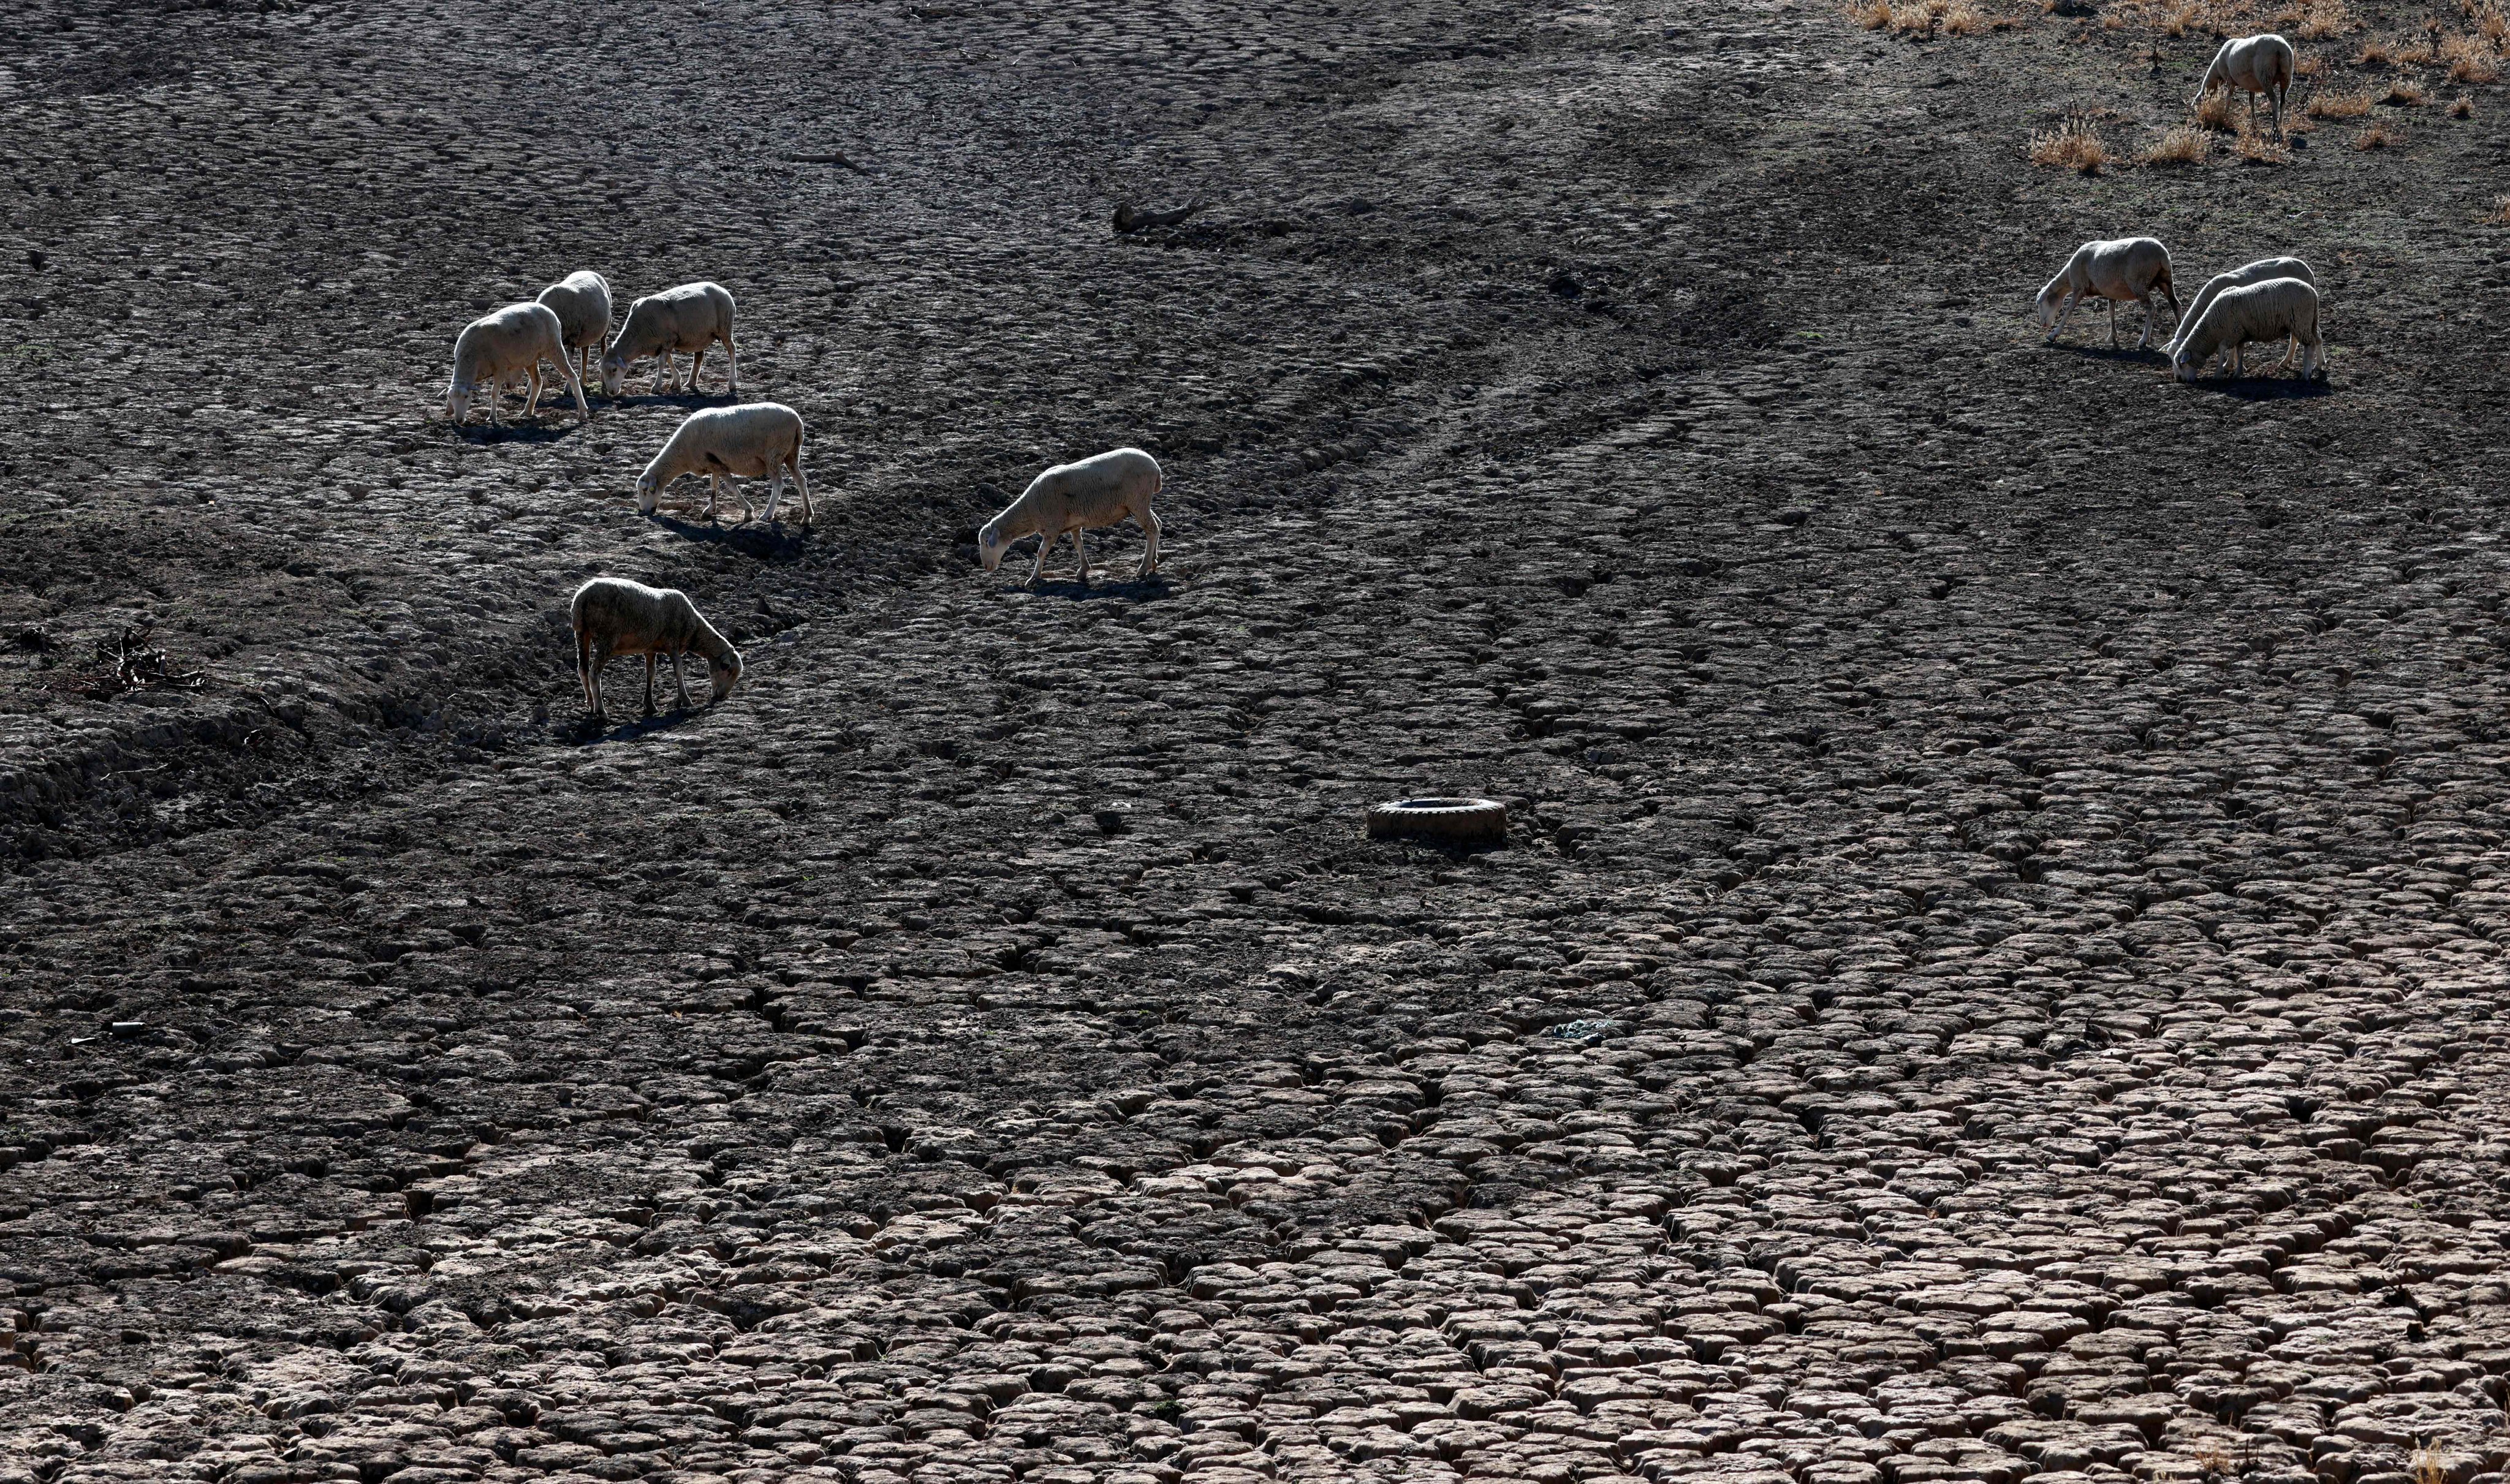 Sheep graze on the Guadiana River’s dry bed in Villarta de los Montes, in the central Spanish region of Extremadura on Tuesday. Scientists say human-induced climate change is making extreme weather, including heatwaves and droughts, more frequent and intense. Photo: AFP